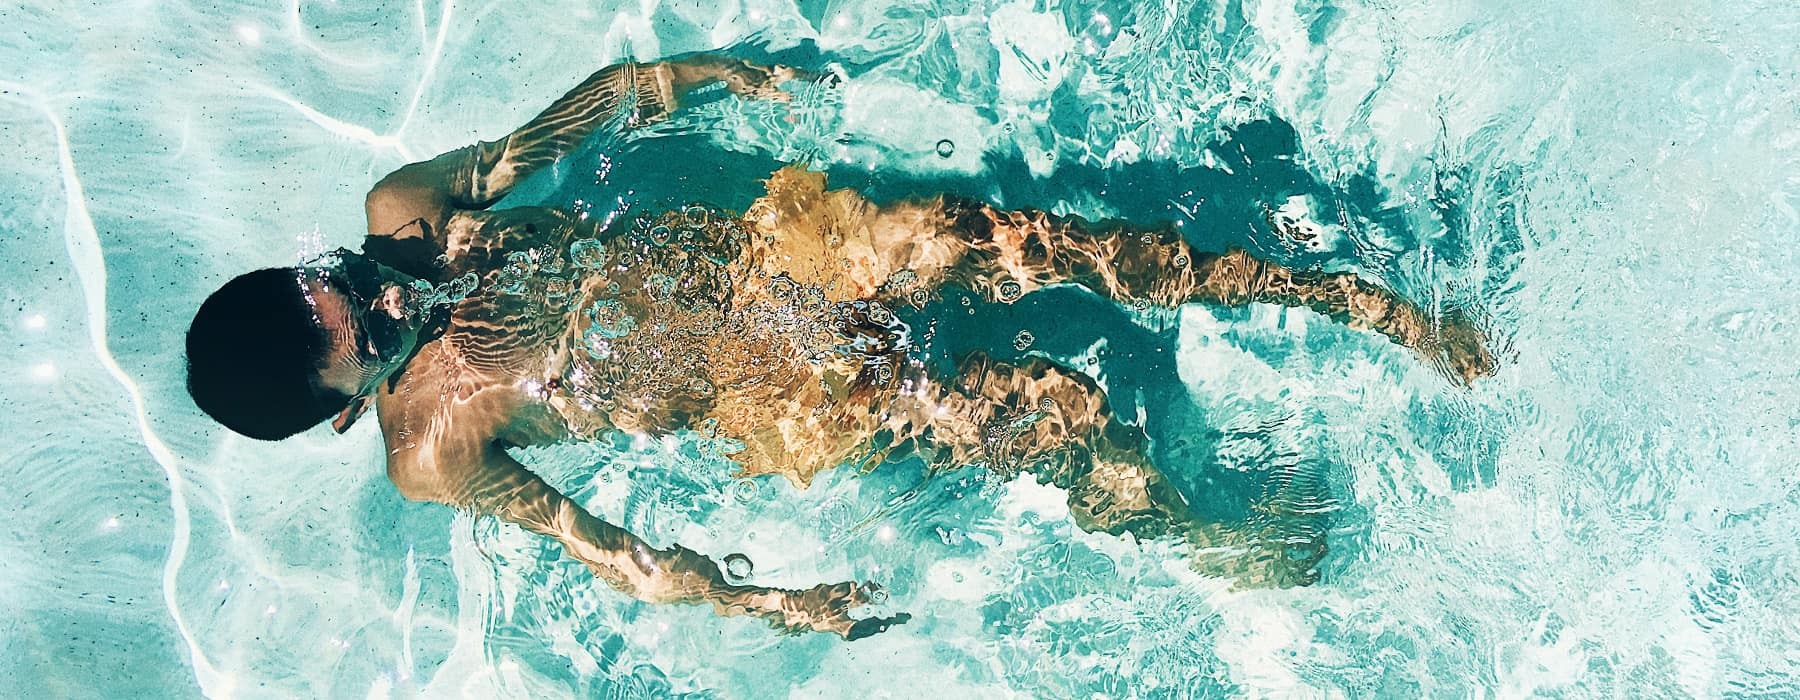 lifestyle image of a man swimming beneath the waters